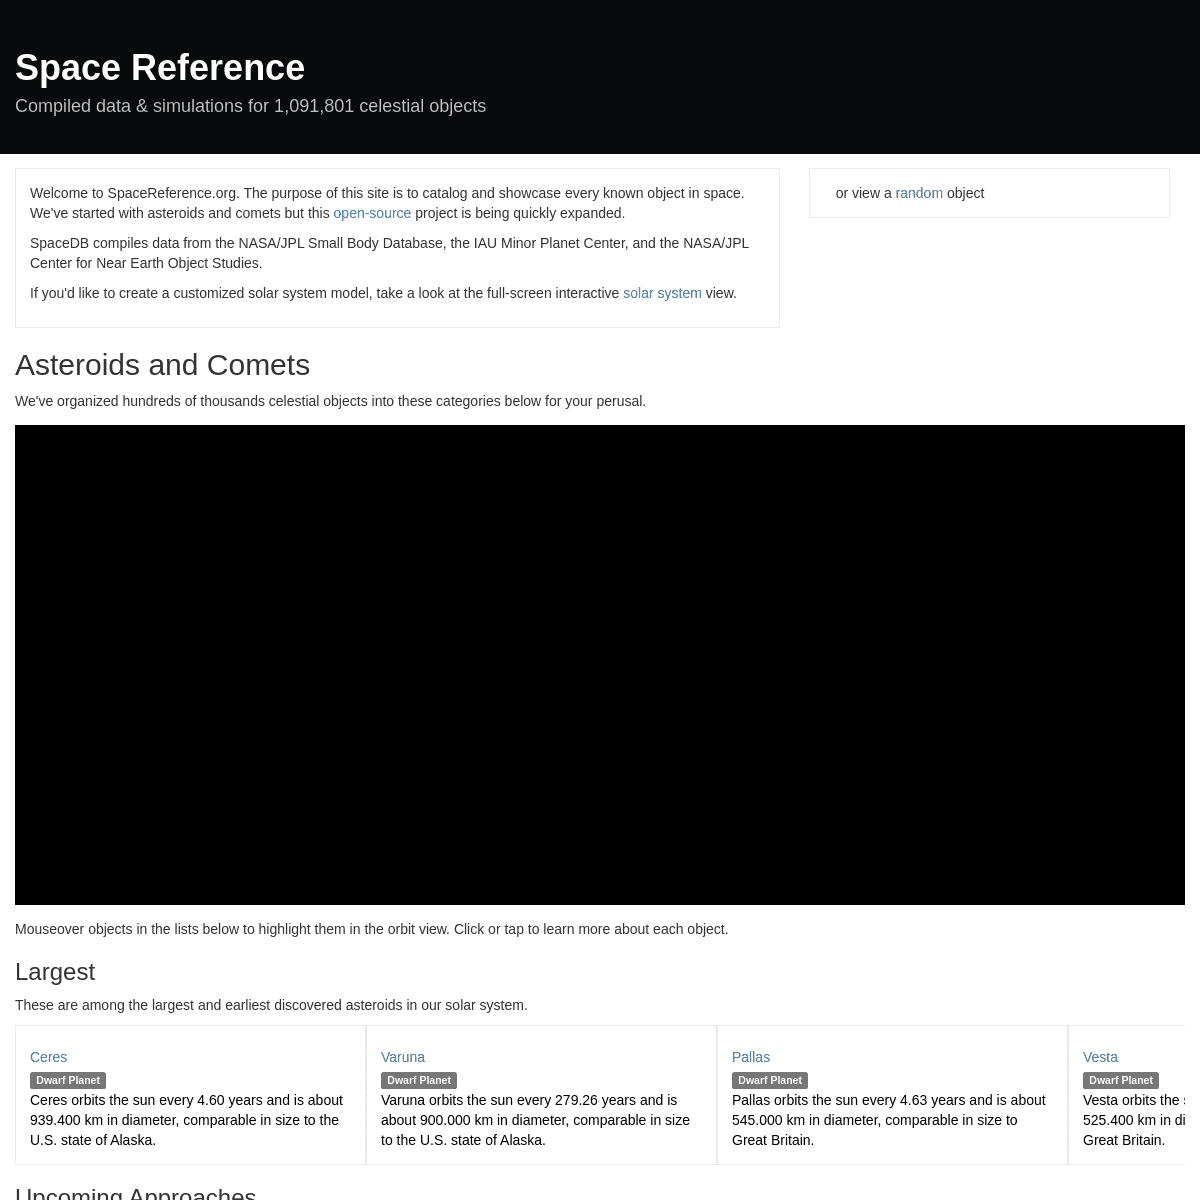 A complete backup of https://spacereference.org